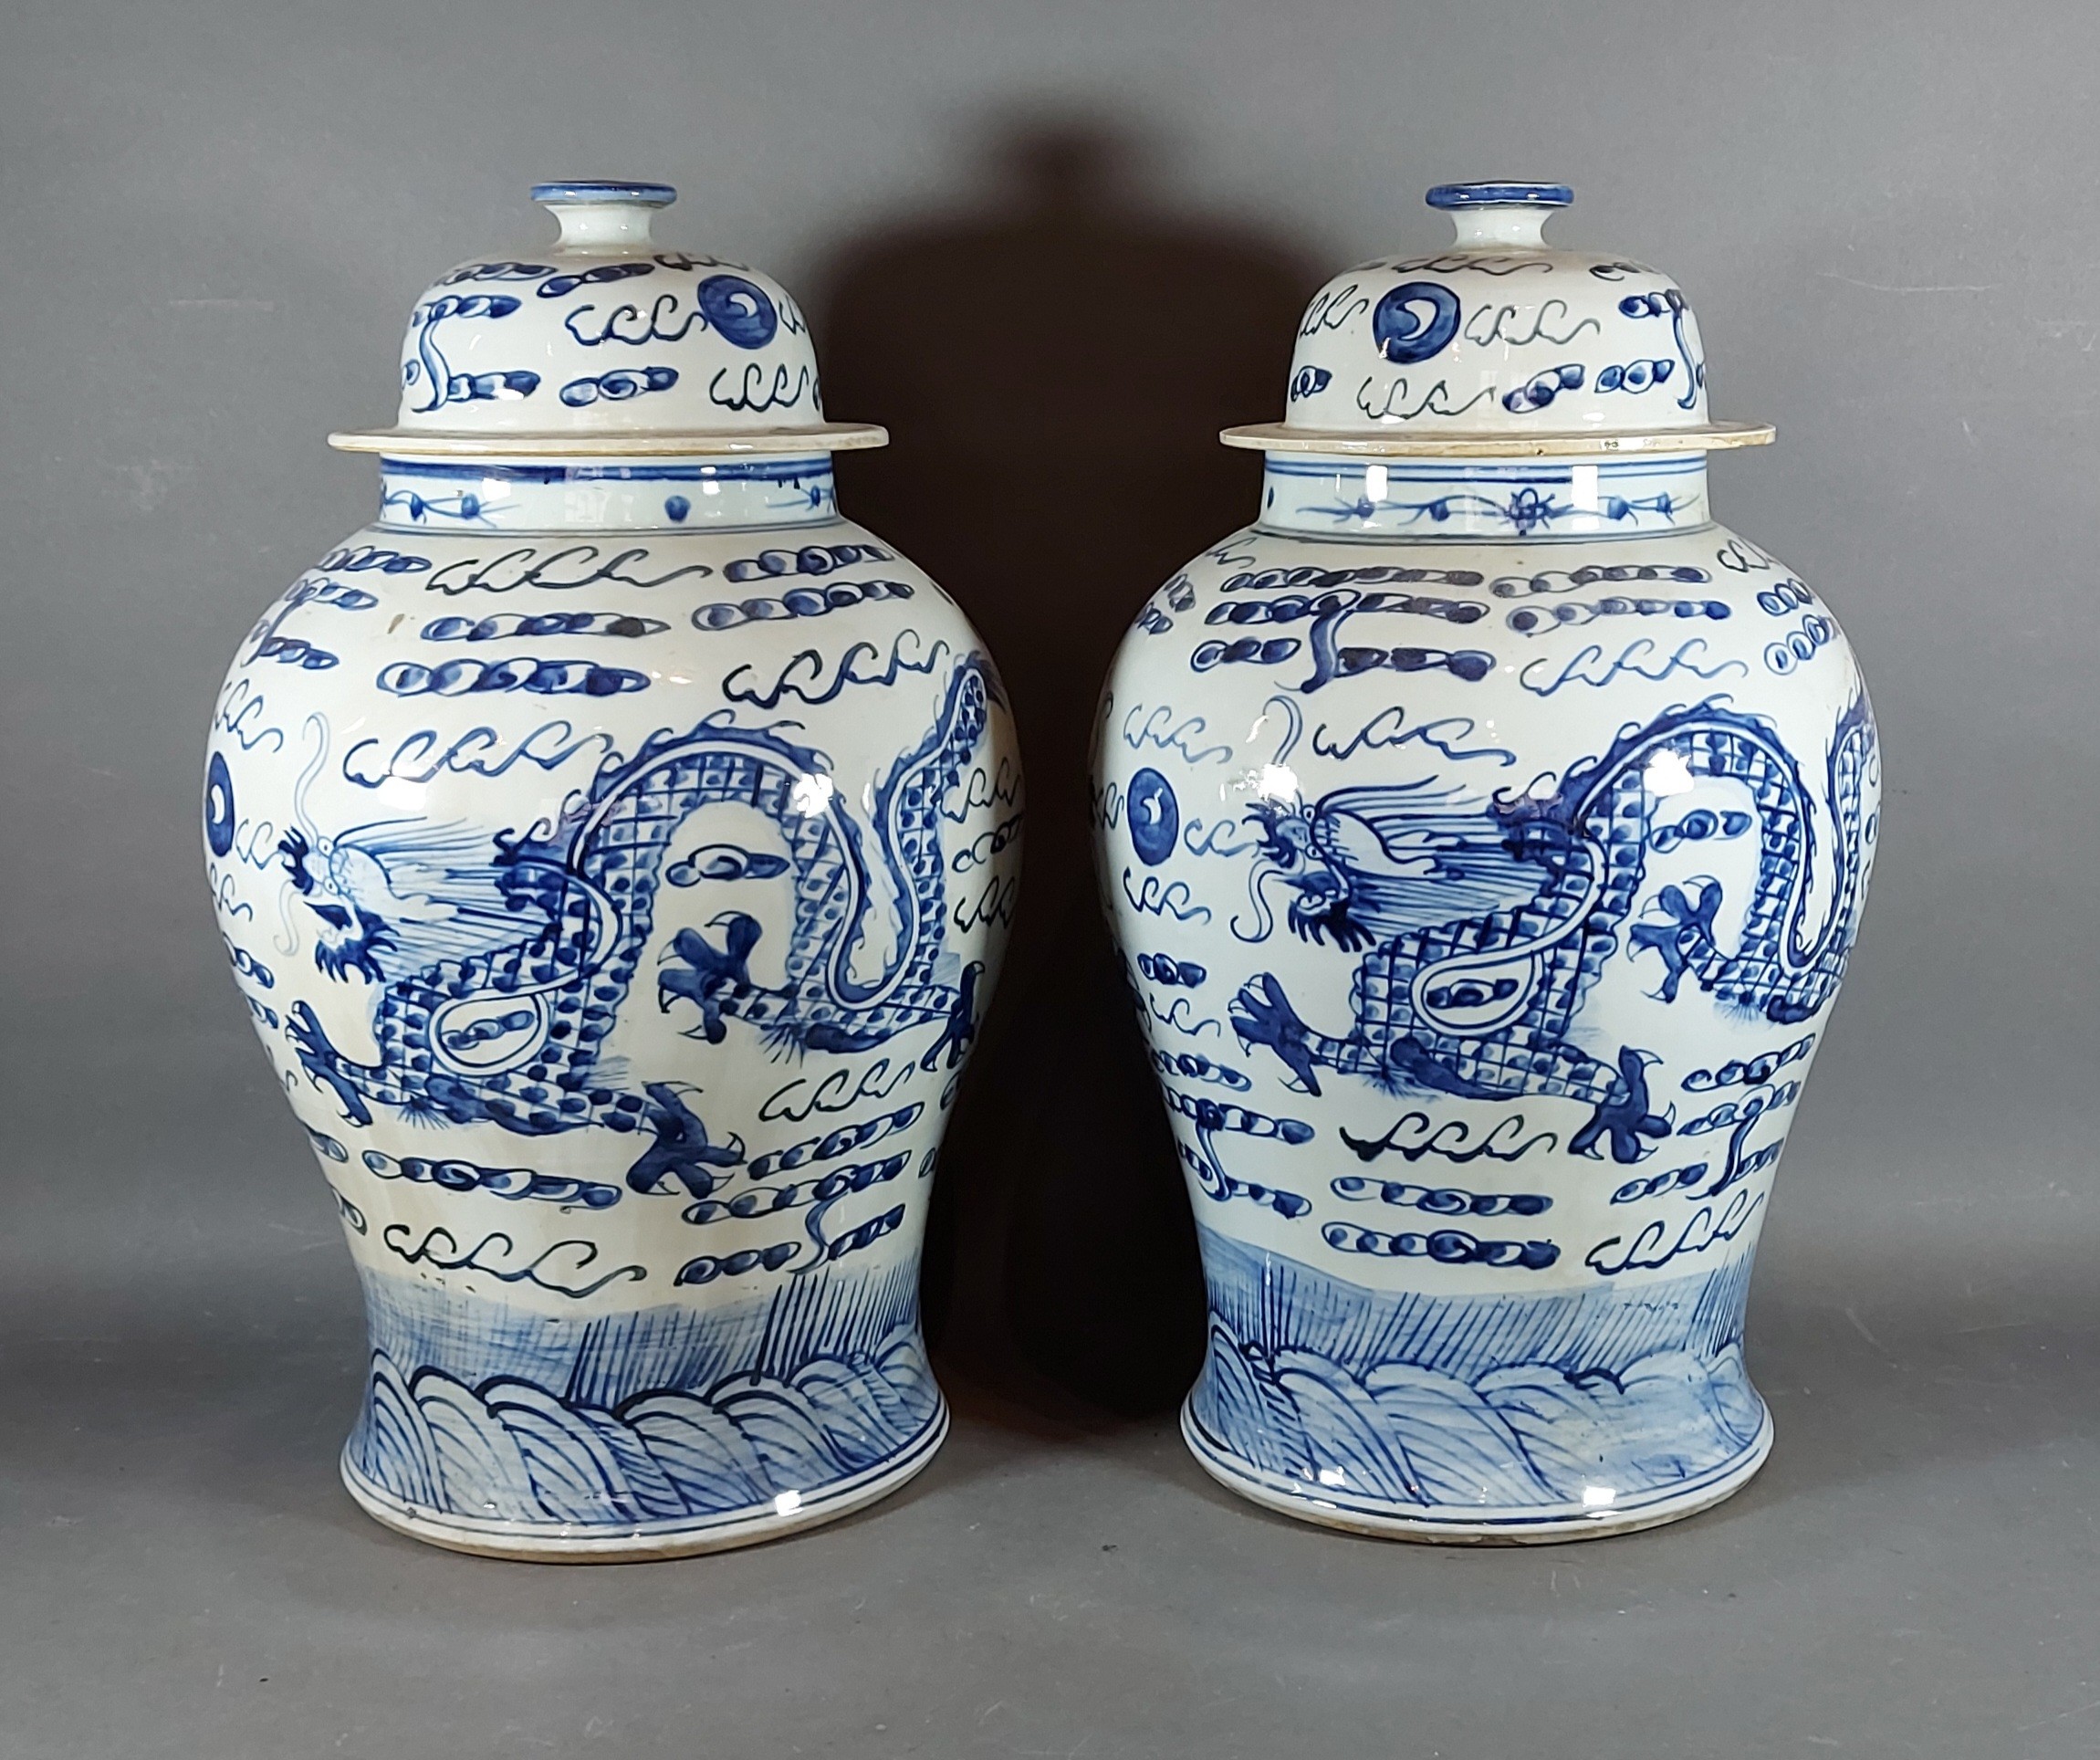 A pair of Chinese blue and white large covered vases, each decorated with serpents in underglaze